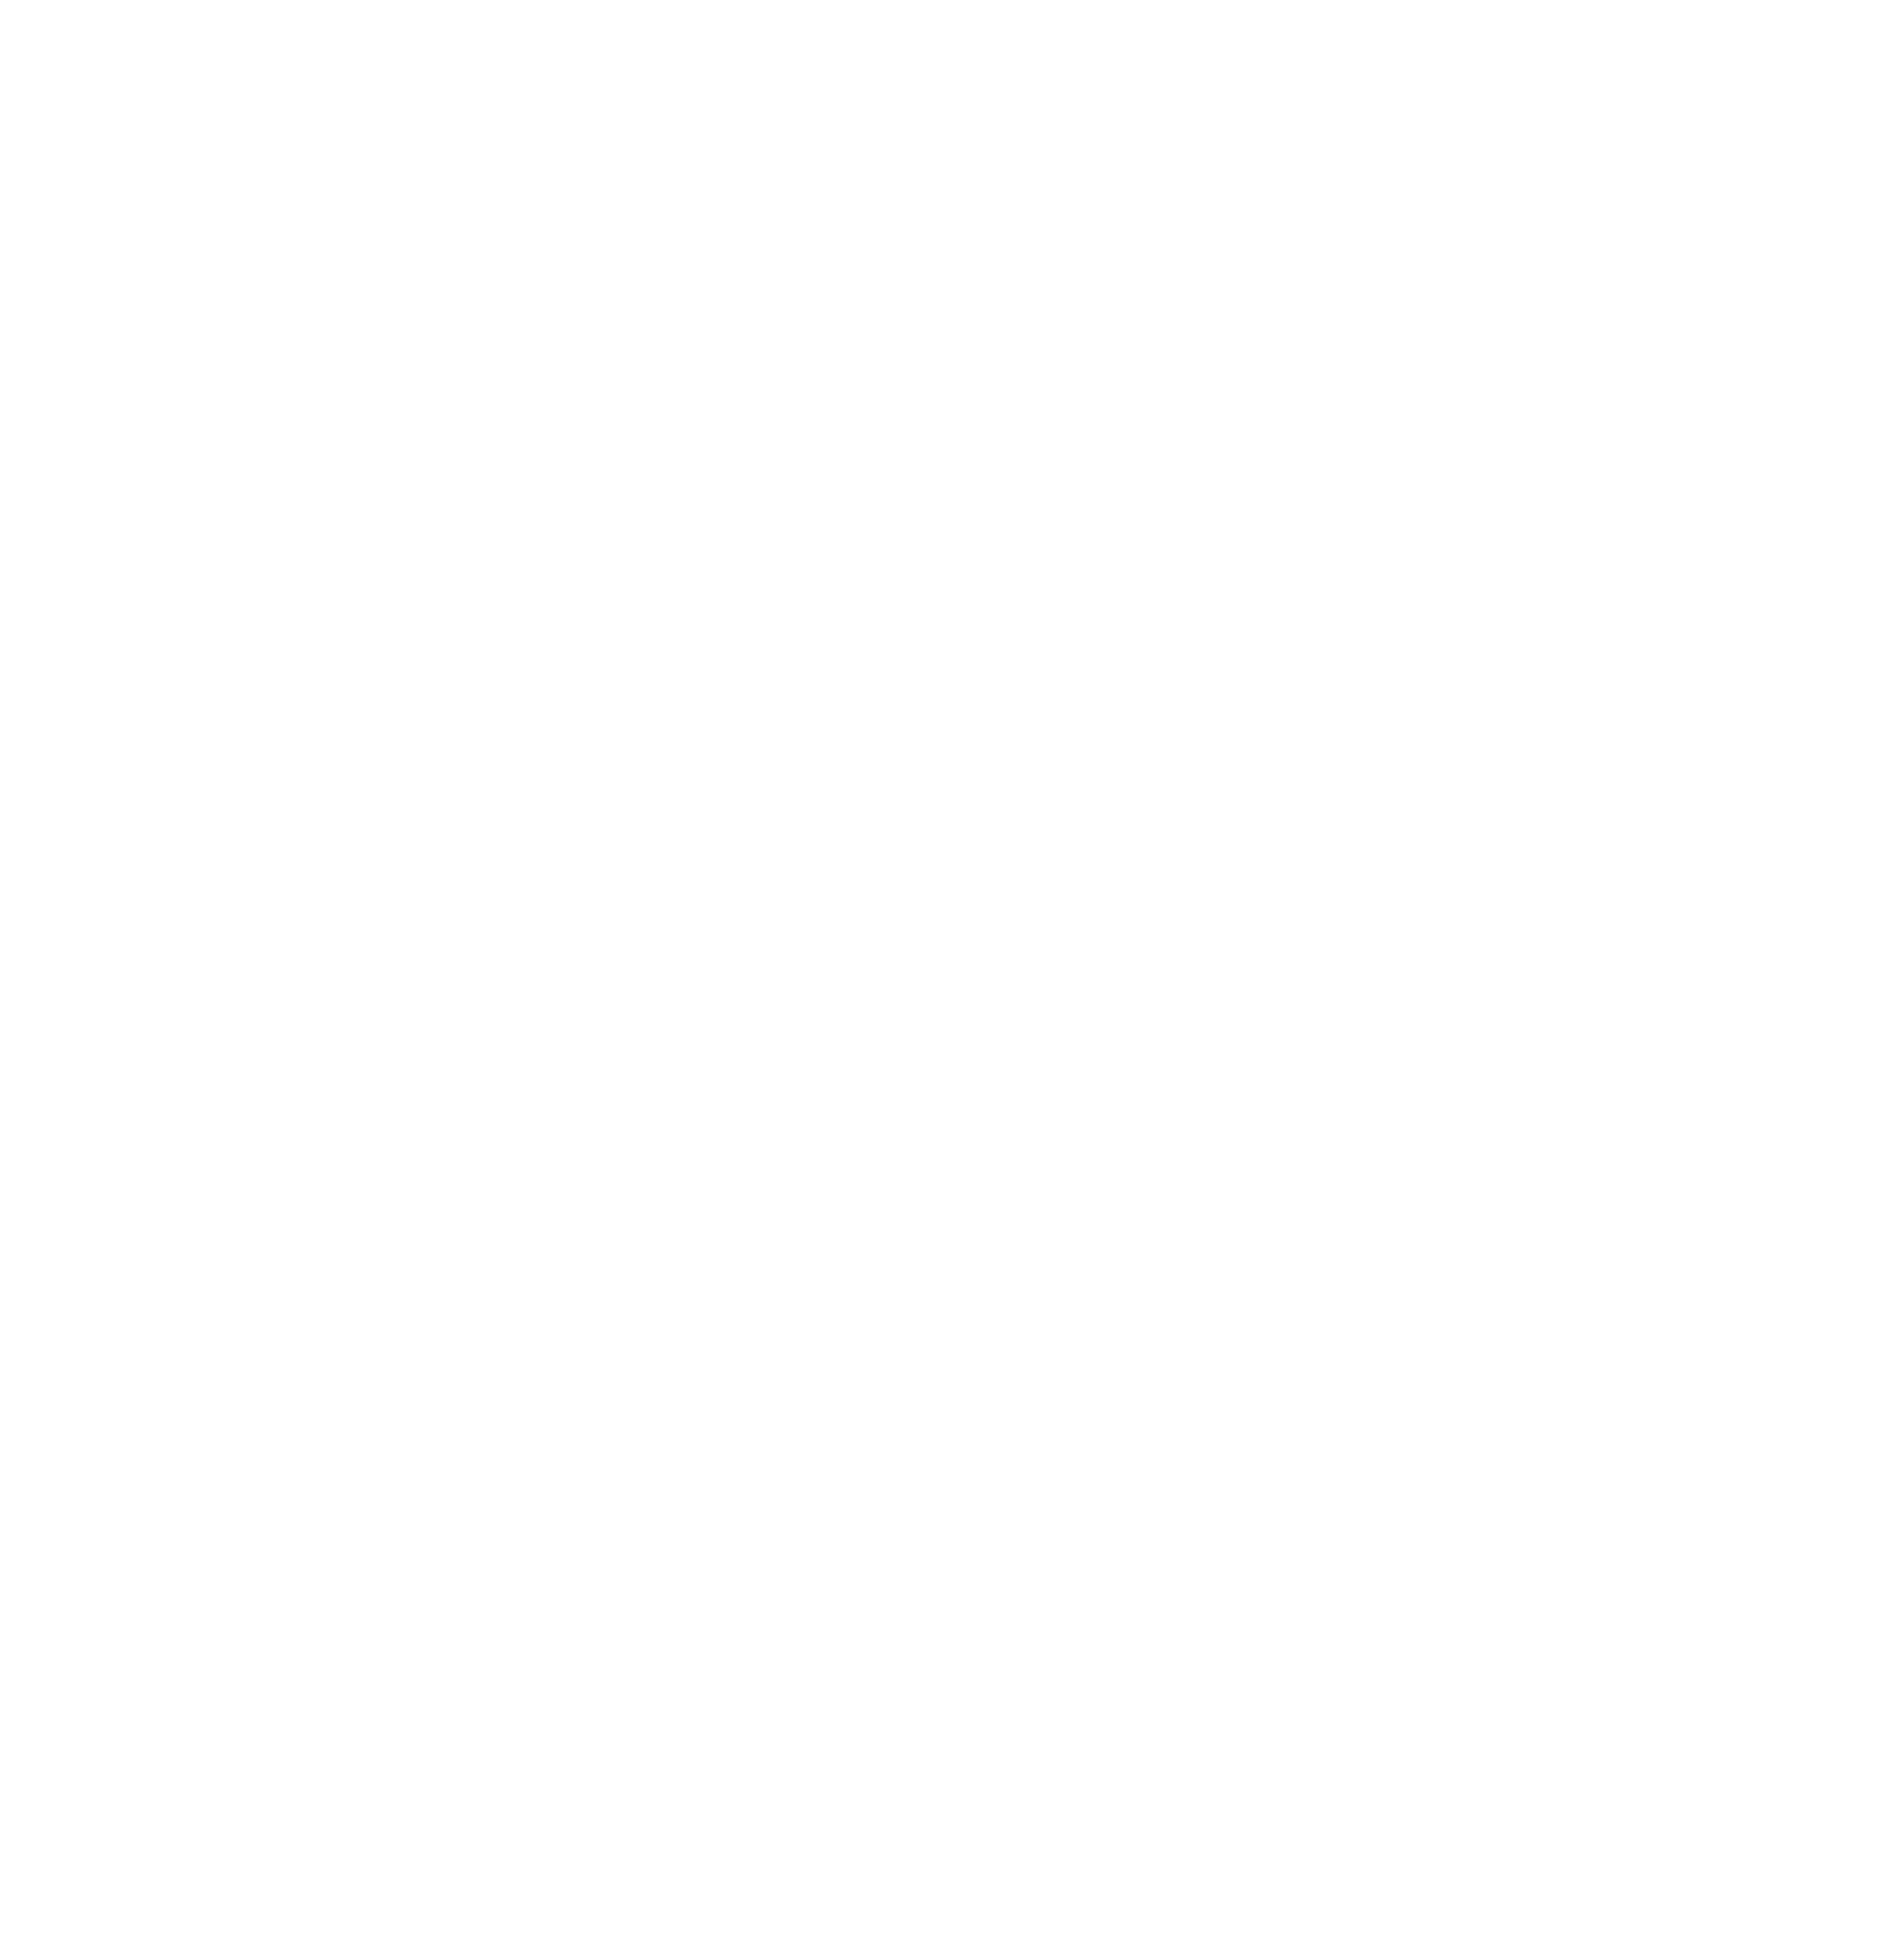 The Blessed Bean Coffee Roasters